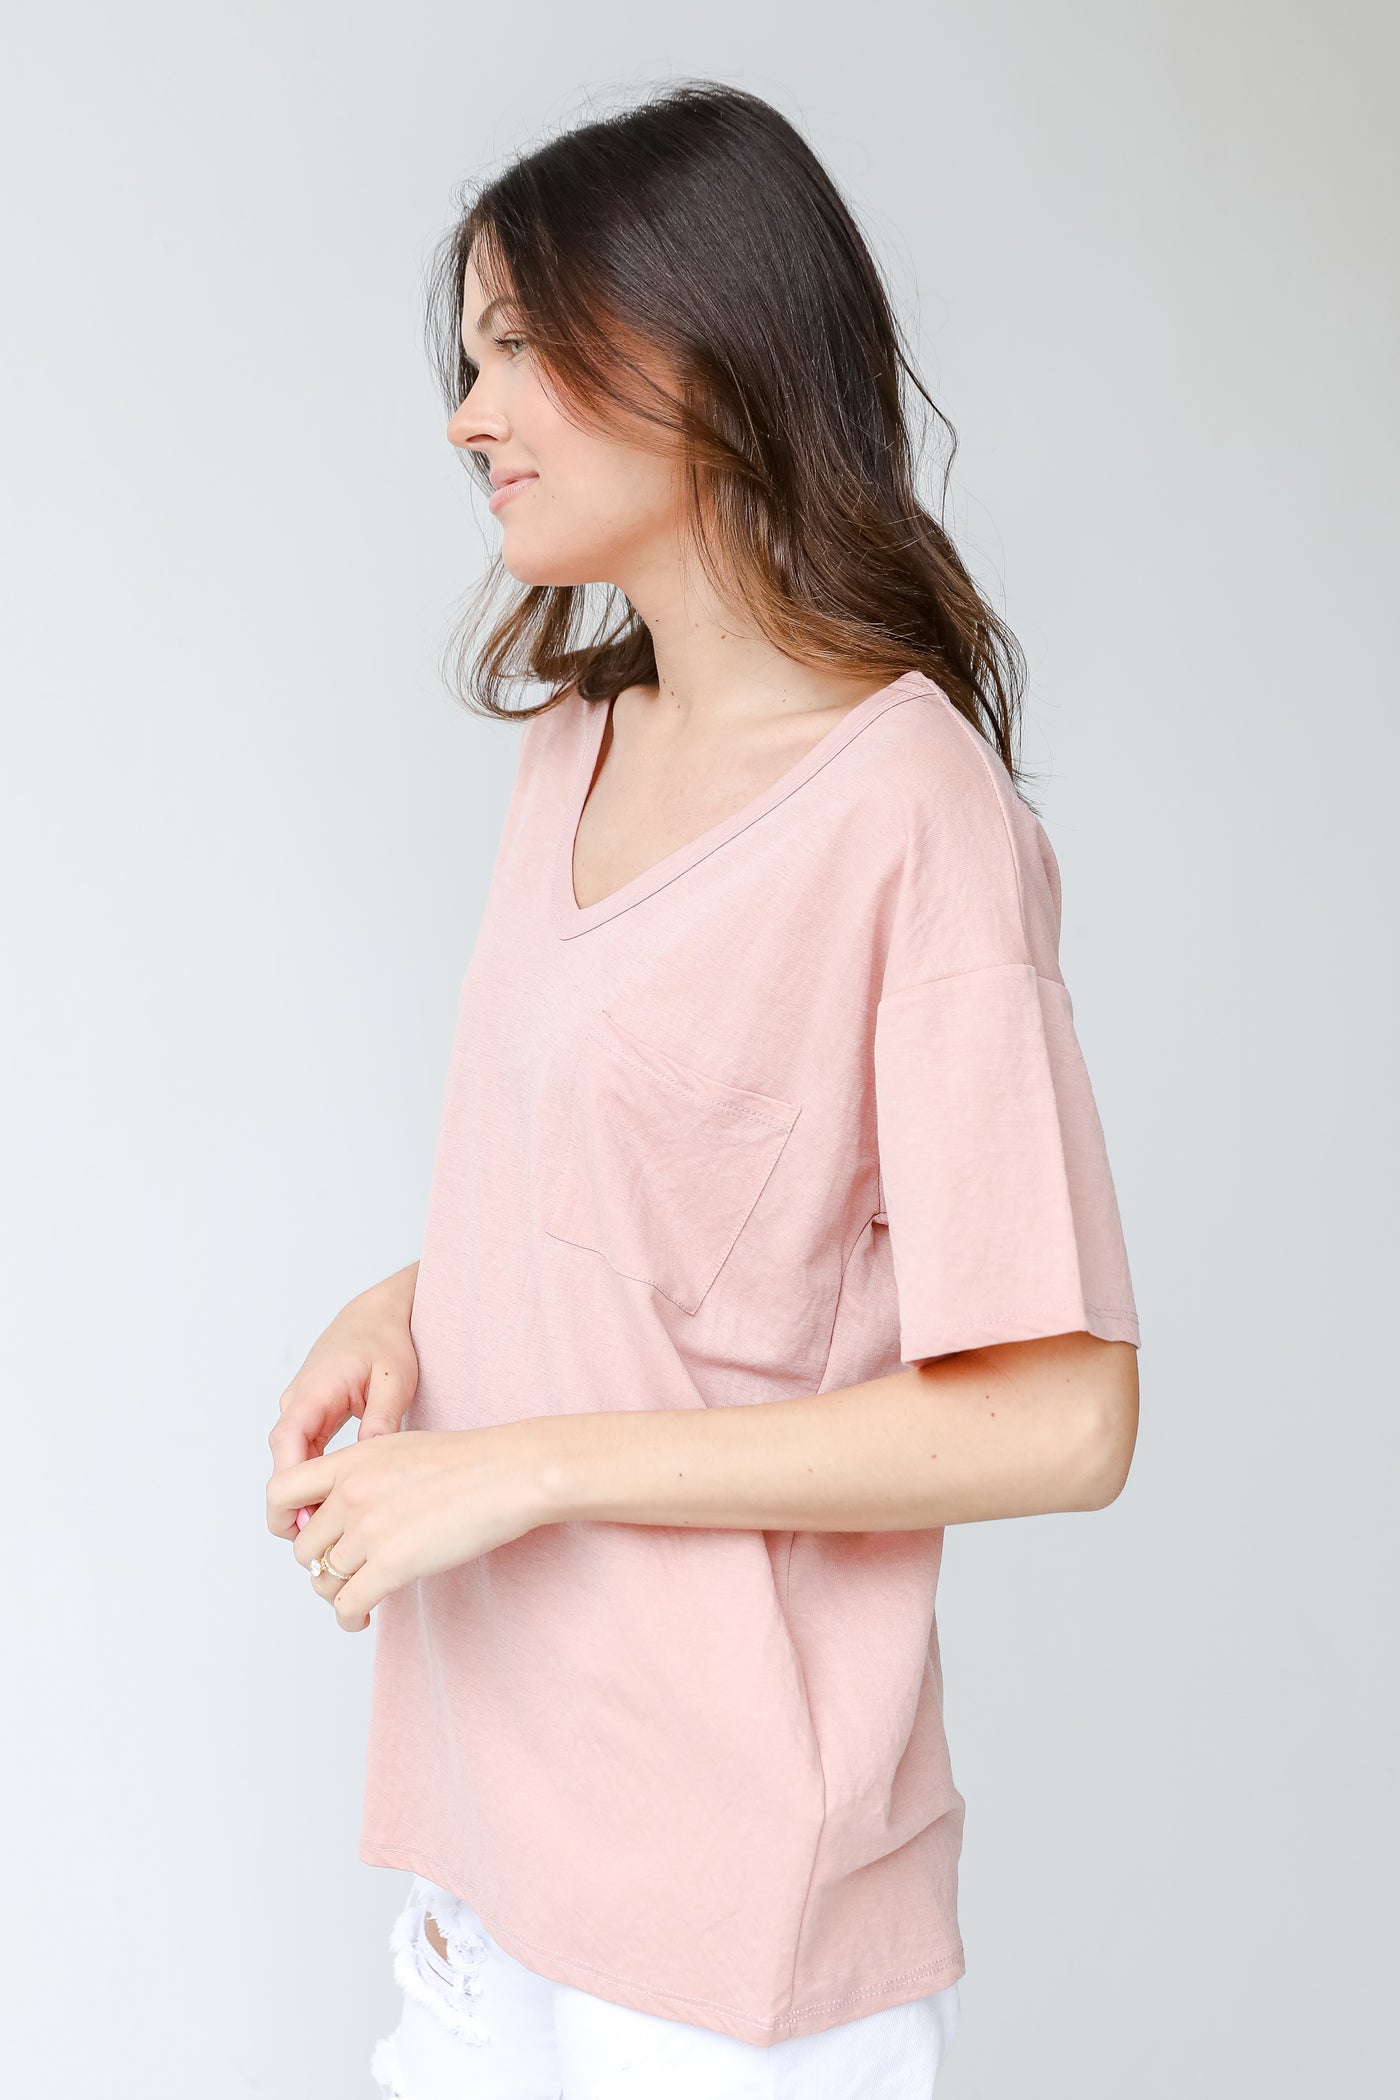 Tee in blush side view